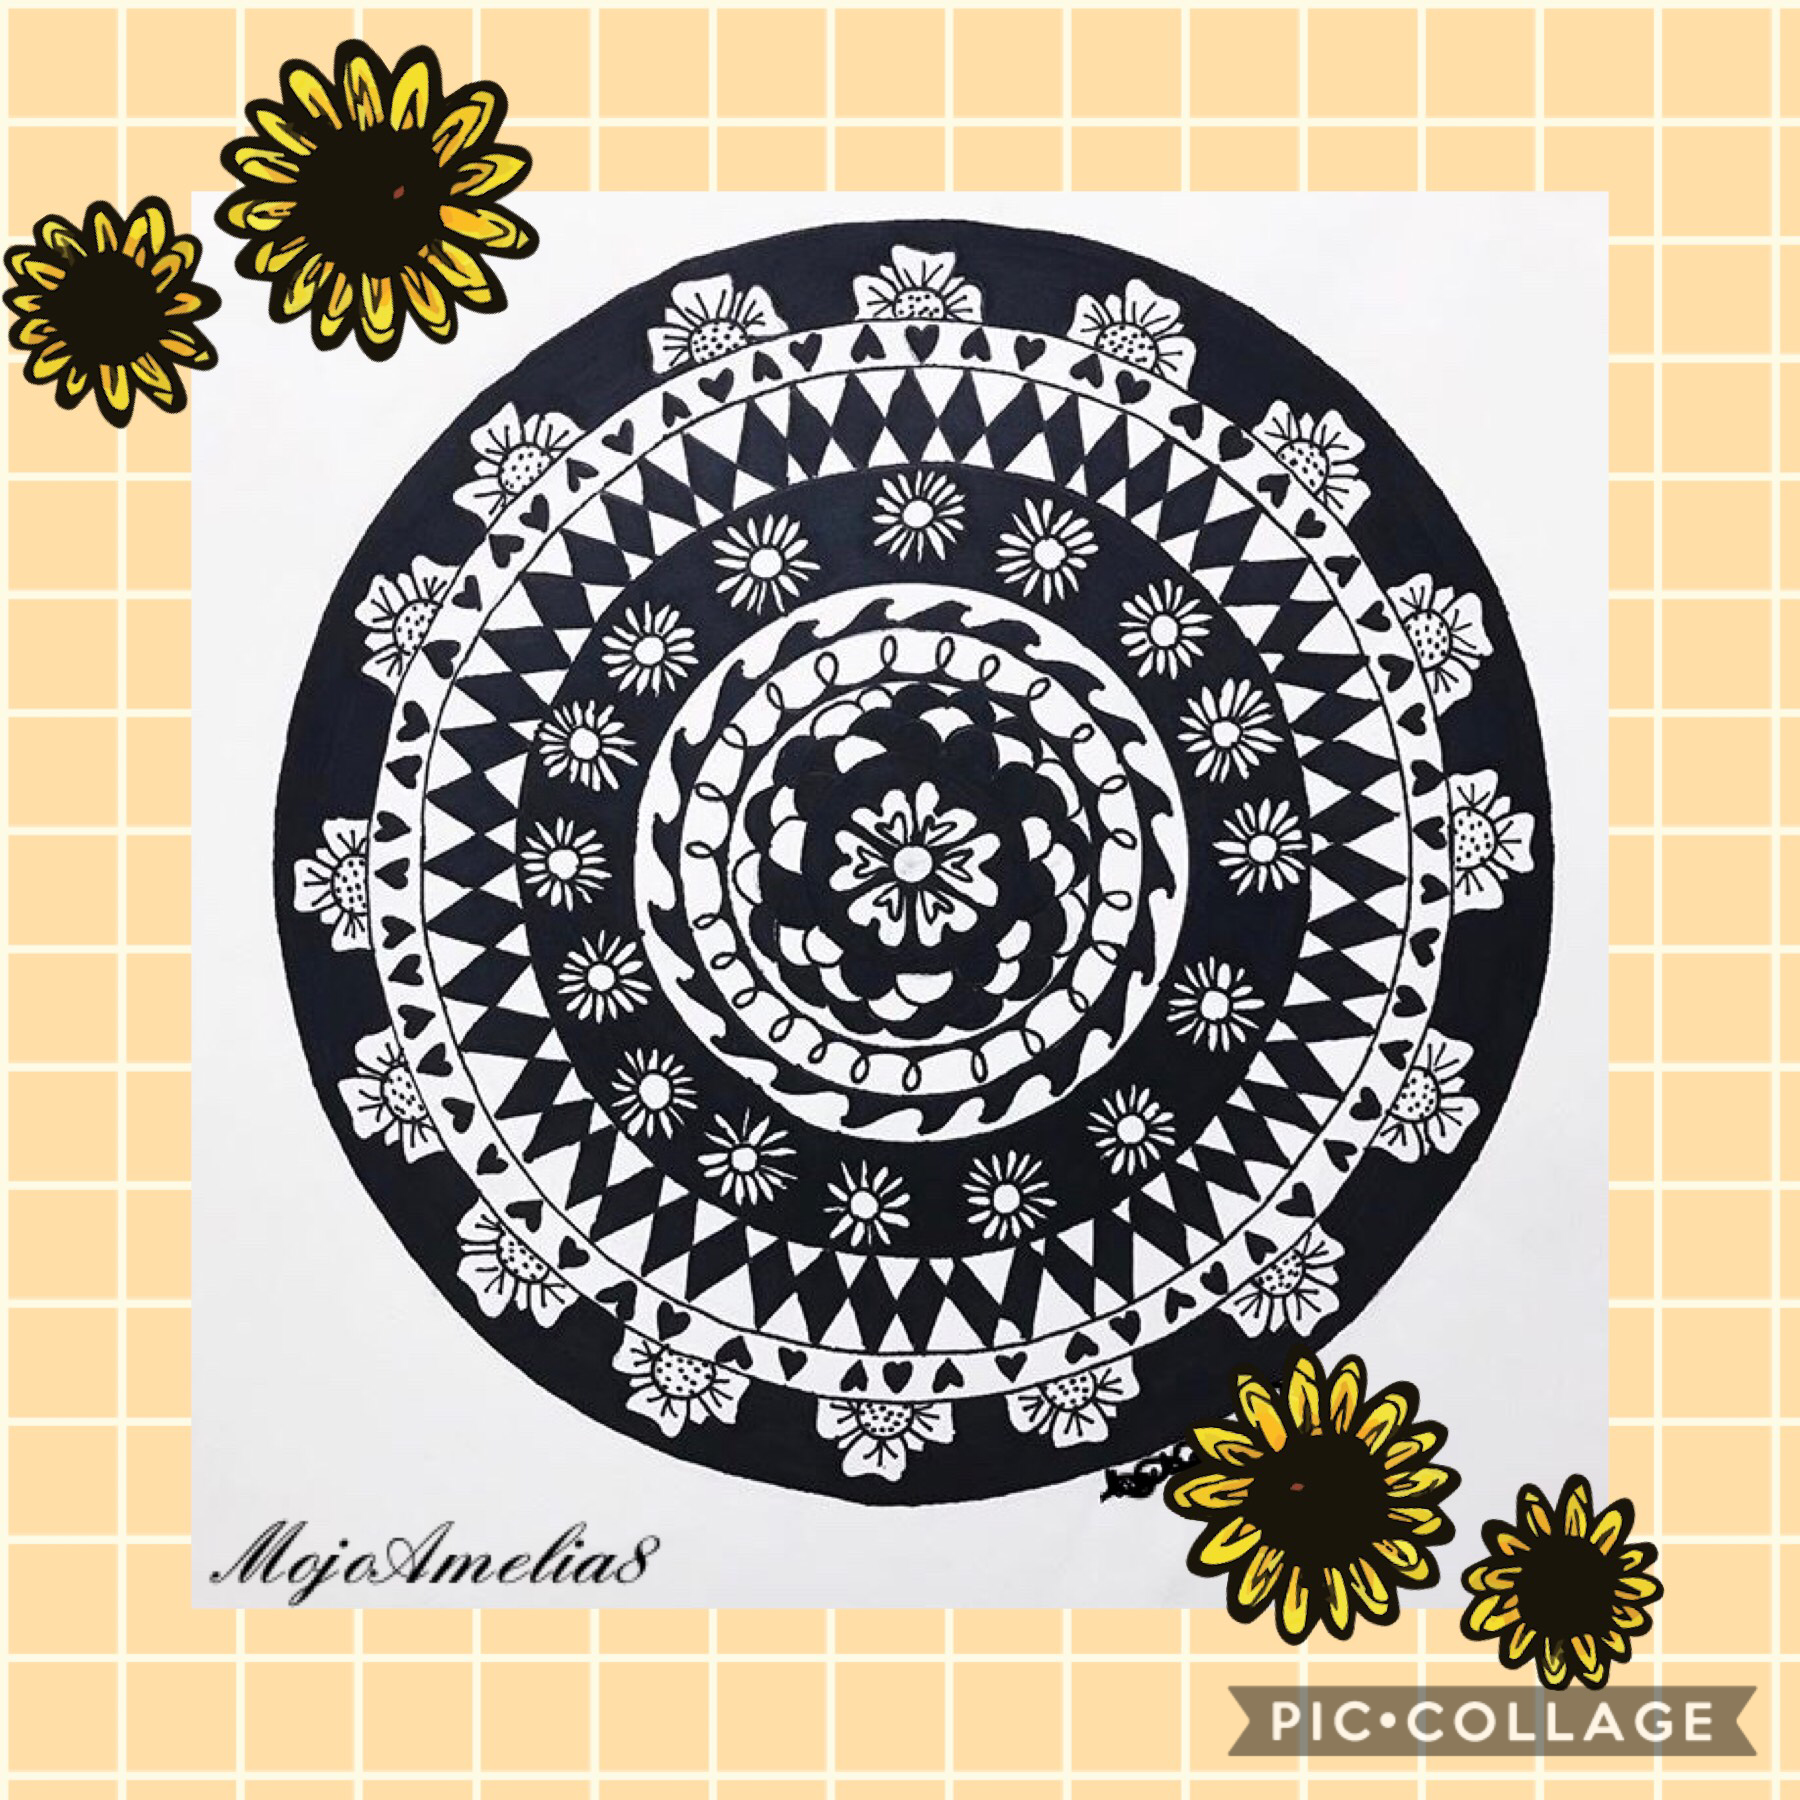 My radial design project for art ☺️ High school has been super busy so I’ve been awful at being active 😂 Sorry 💕 